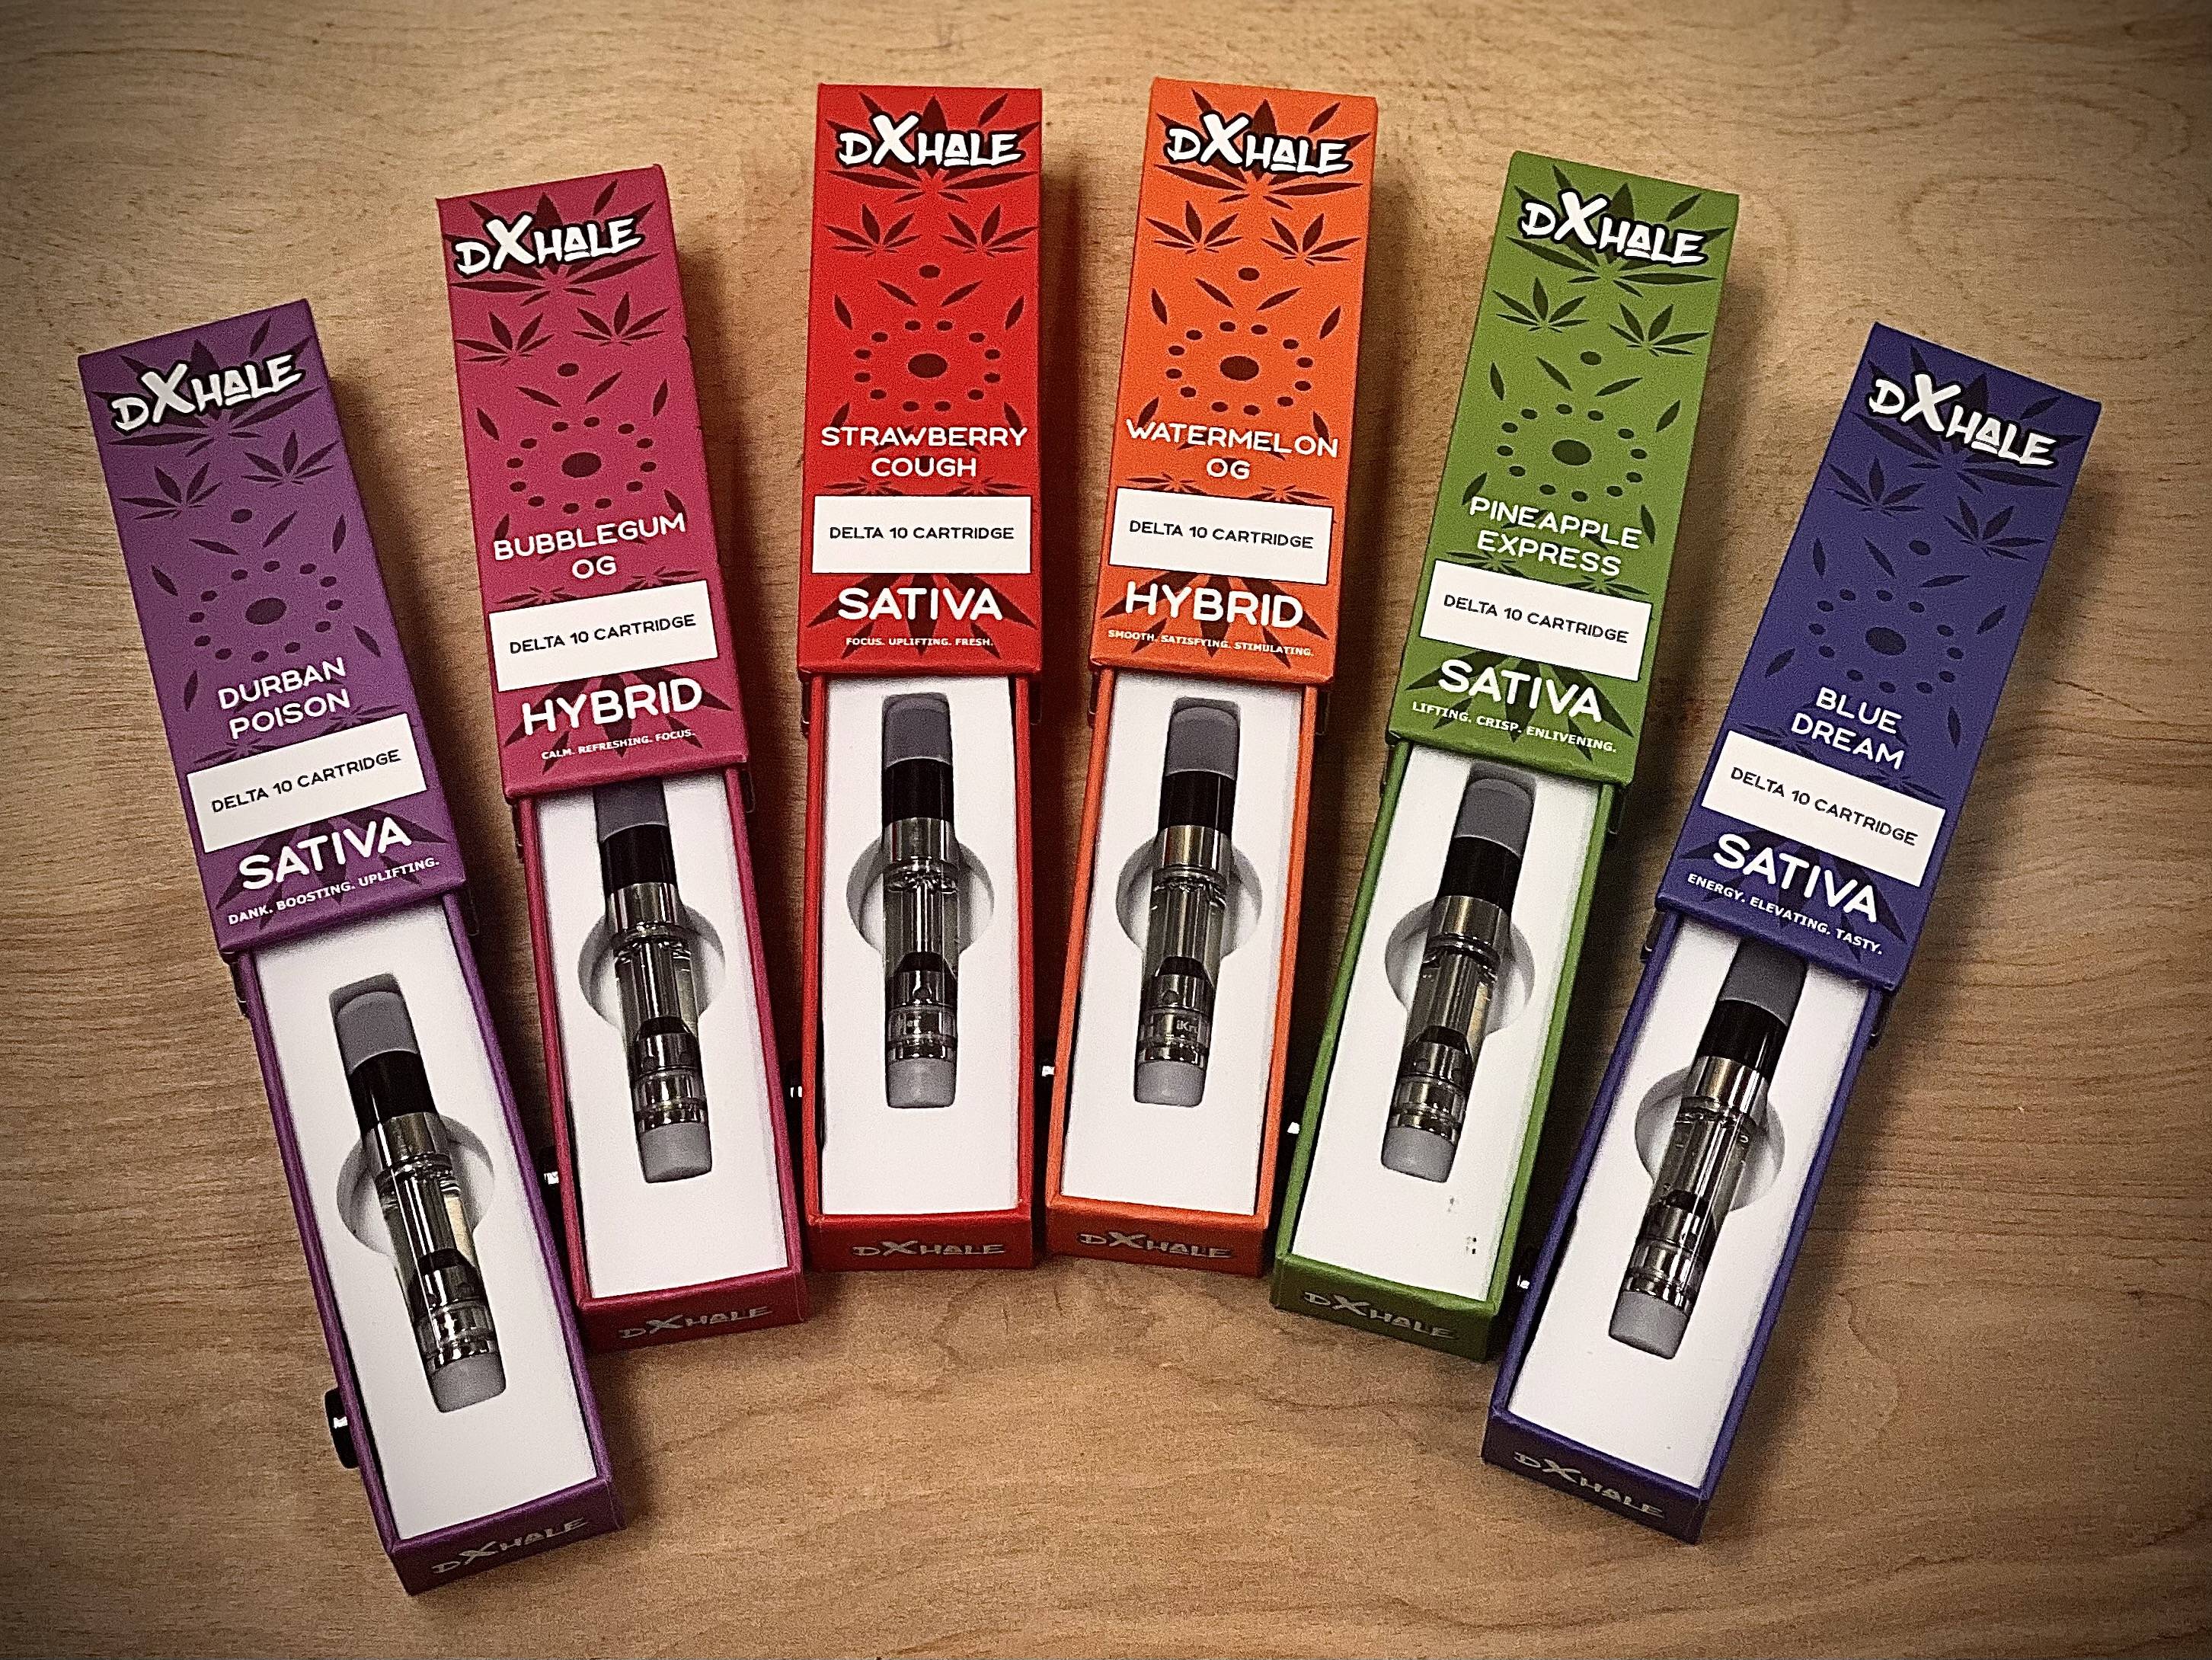 A range of DXHALE delta 10 carts in various flavors on a wooden background.